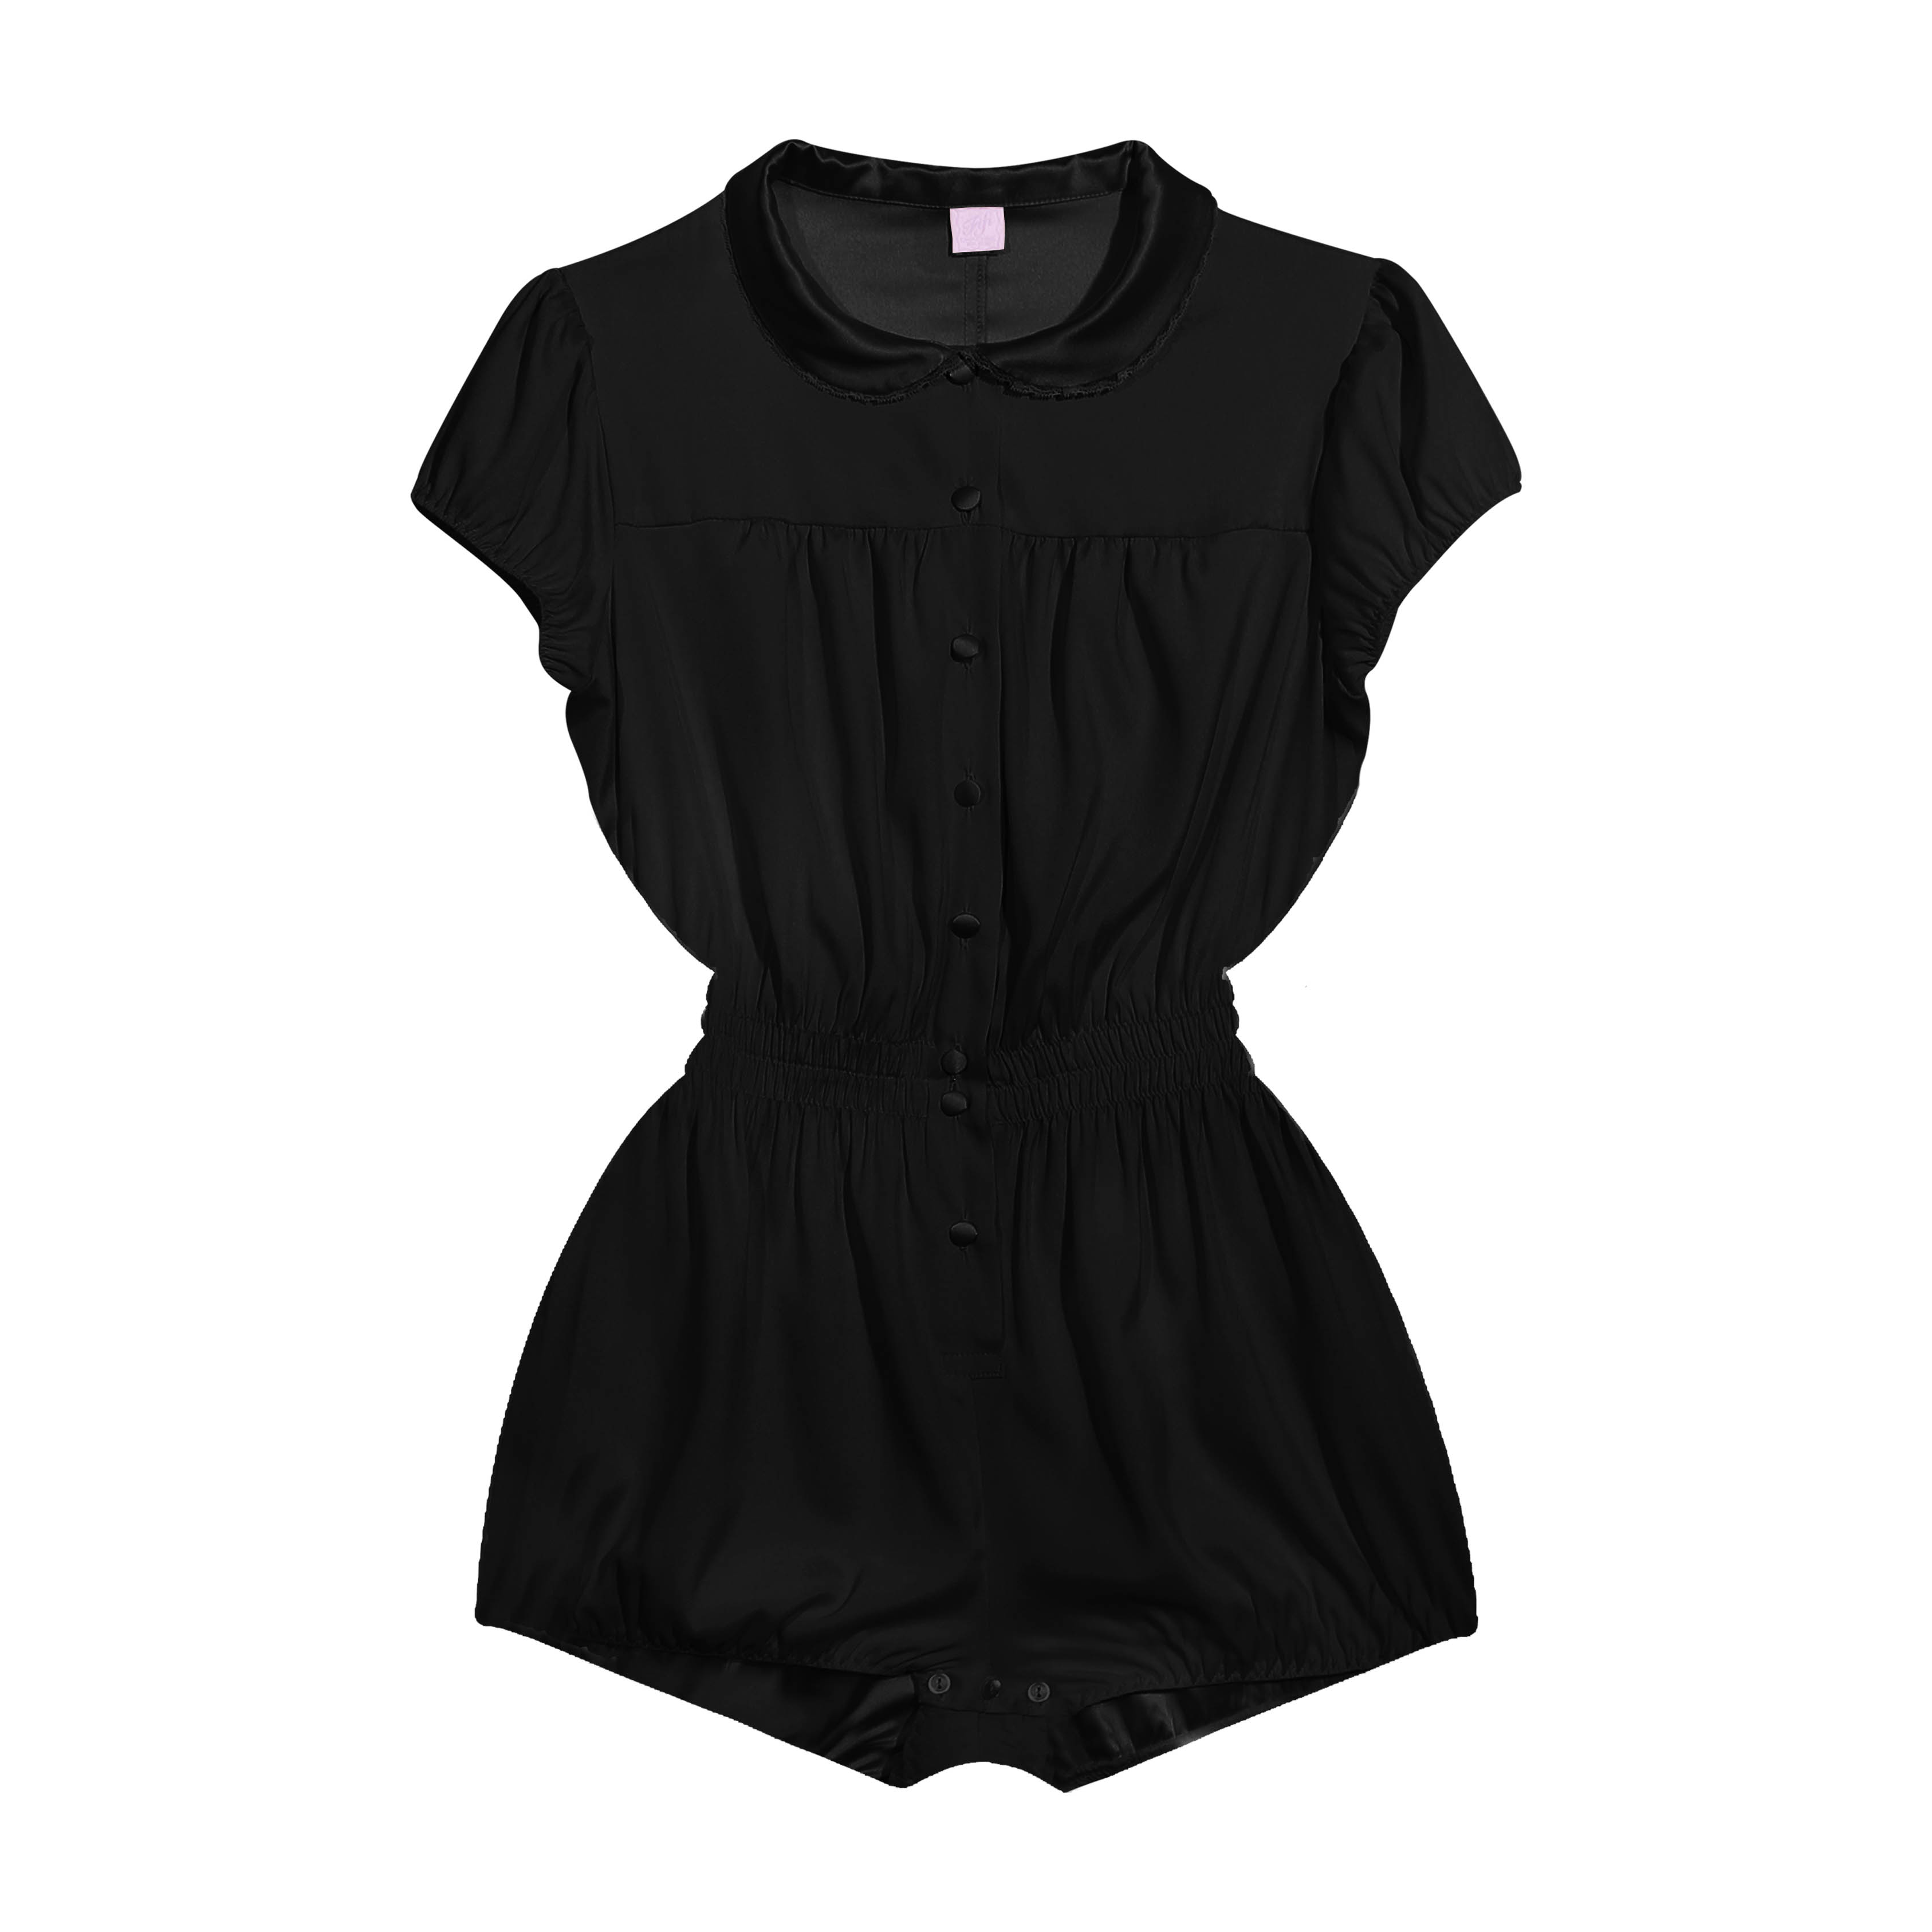 “Babyloo” Playsuit | Fifi Chachnil - Official website